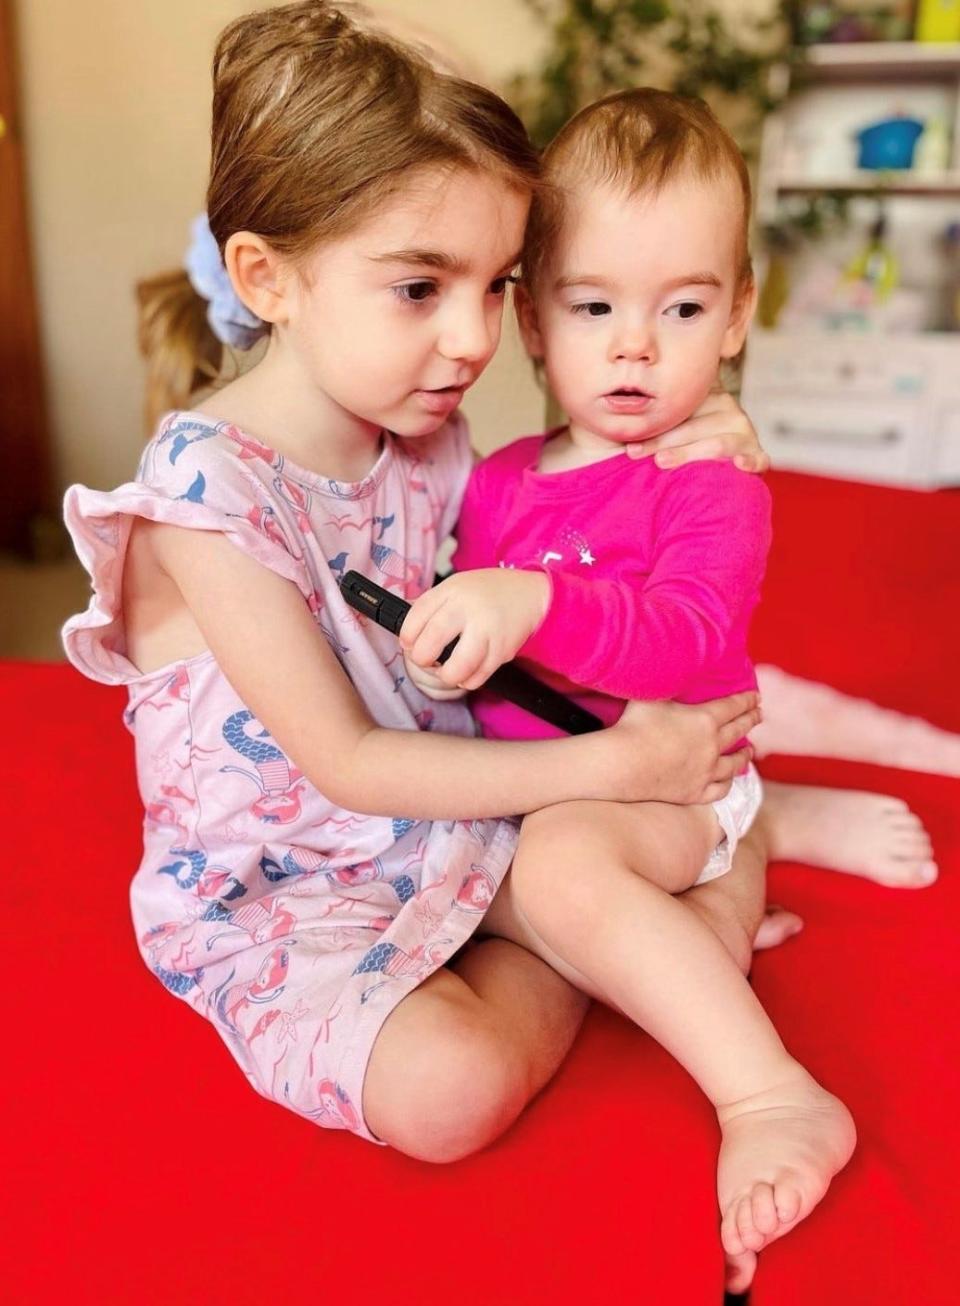 Natalie and her sister, Margot, 18 months, in July.